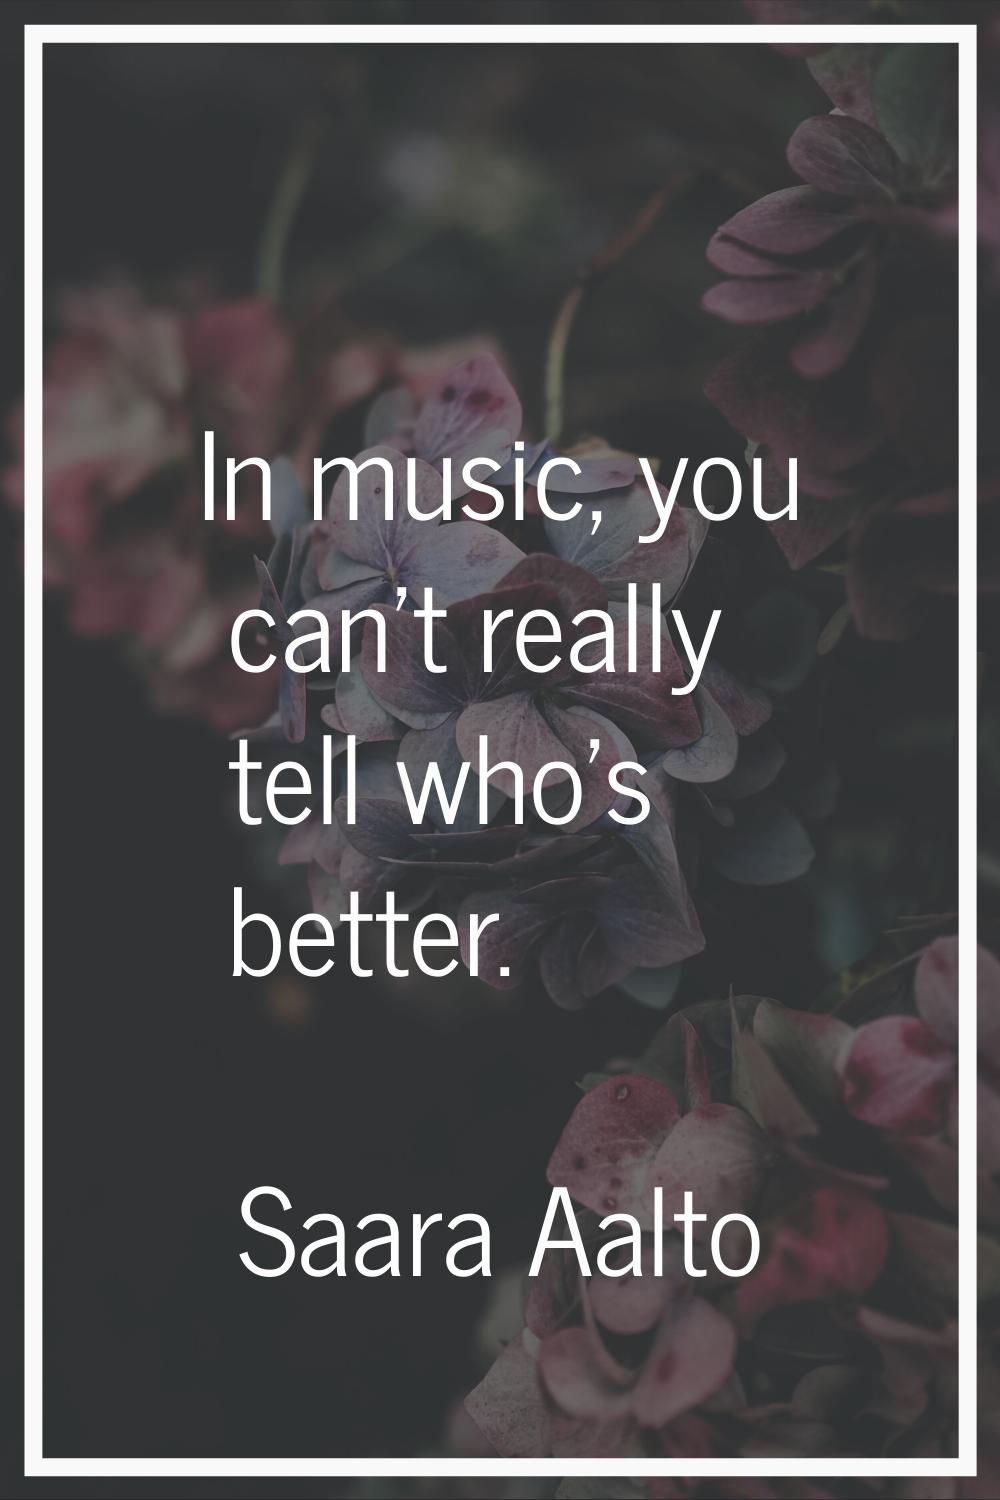 In music, you can't really tell who's better.